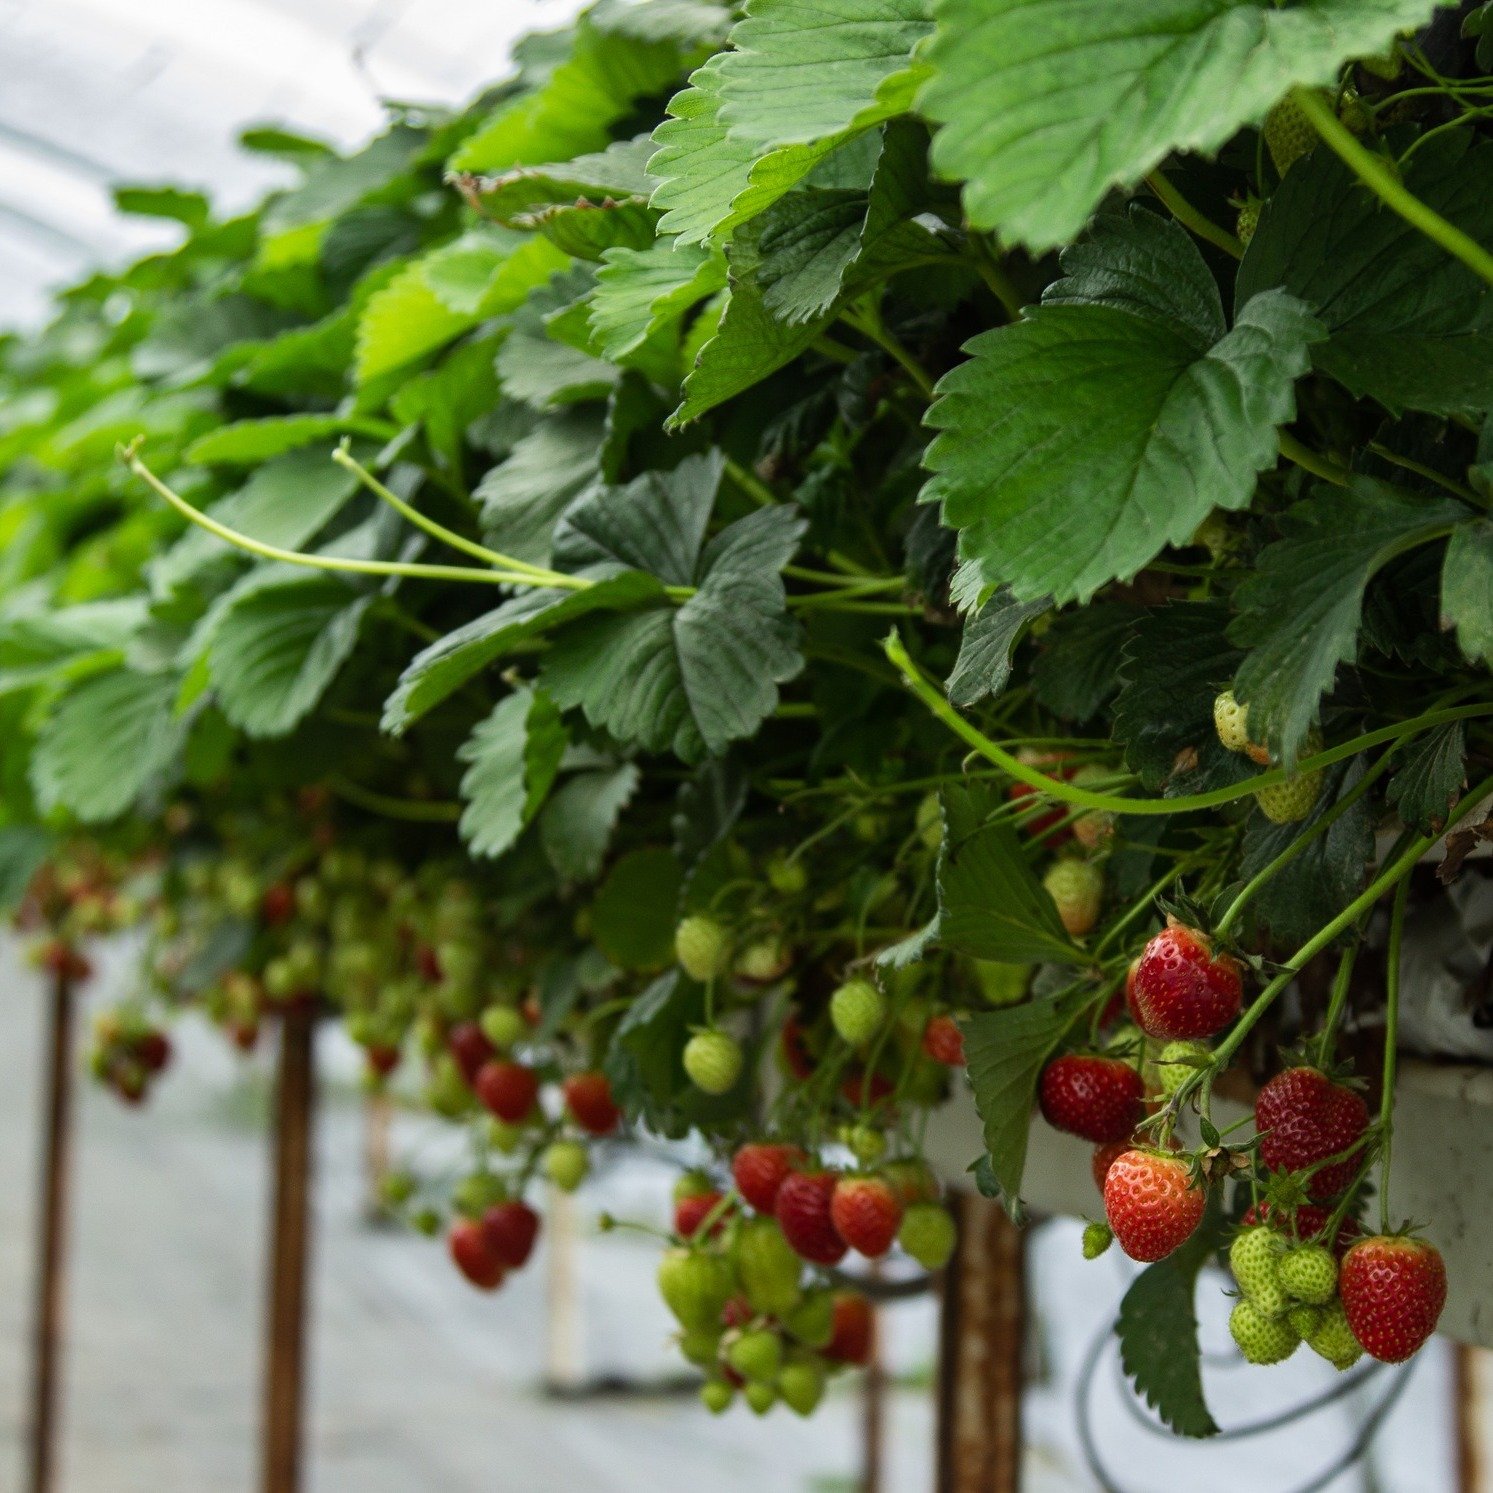 🍓 Strawberry season is soon approaching 🍓

Did you know Wexford is widely known for its roadside huts across the island of Ireland. 🍓

Throughout the year, Wexford&rsquo;s roadside comes alive as farmers and growers park up their colourful huts an